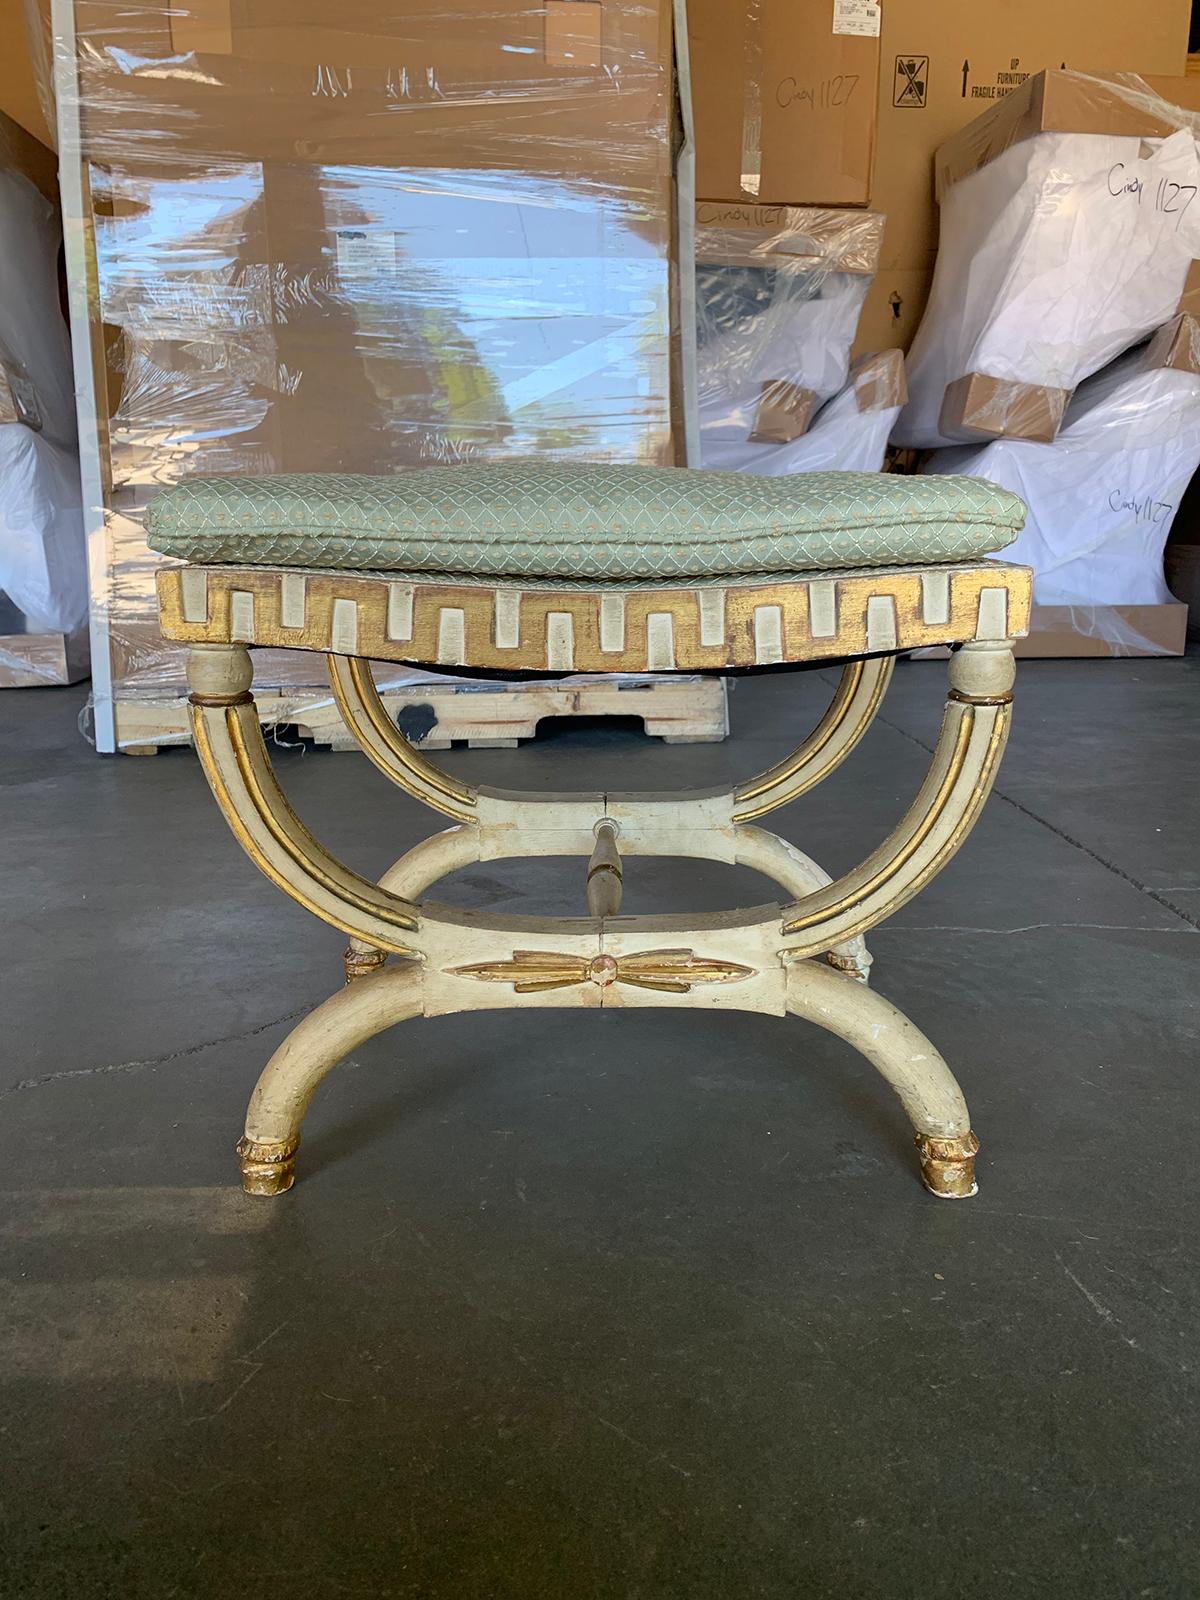 20th century neoclassical painted bench stool with Greek key and gilt details.